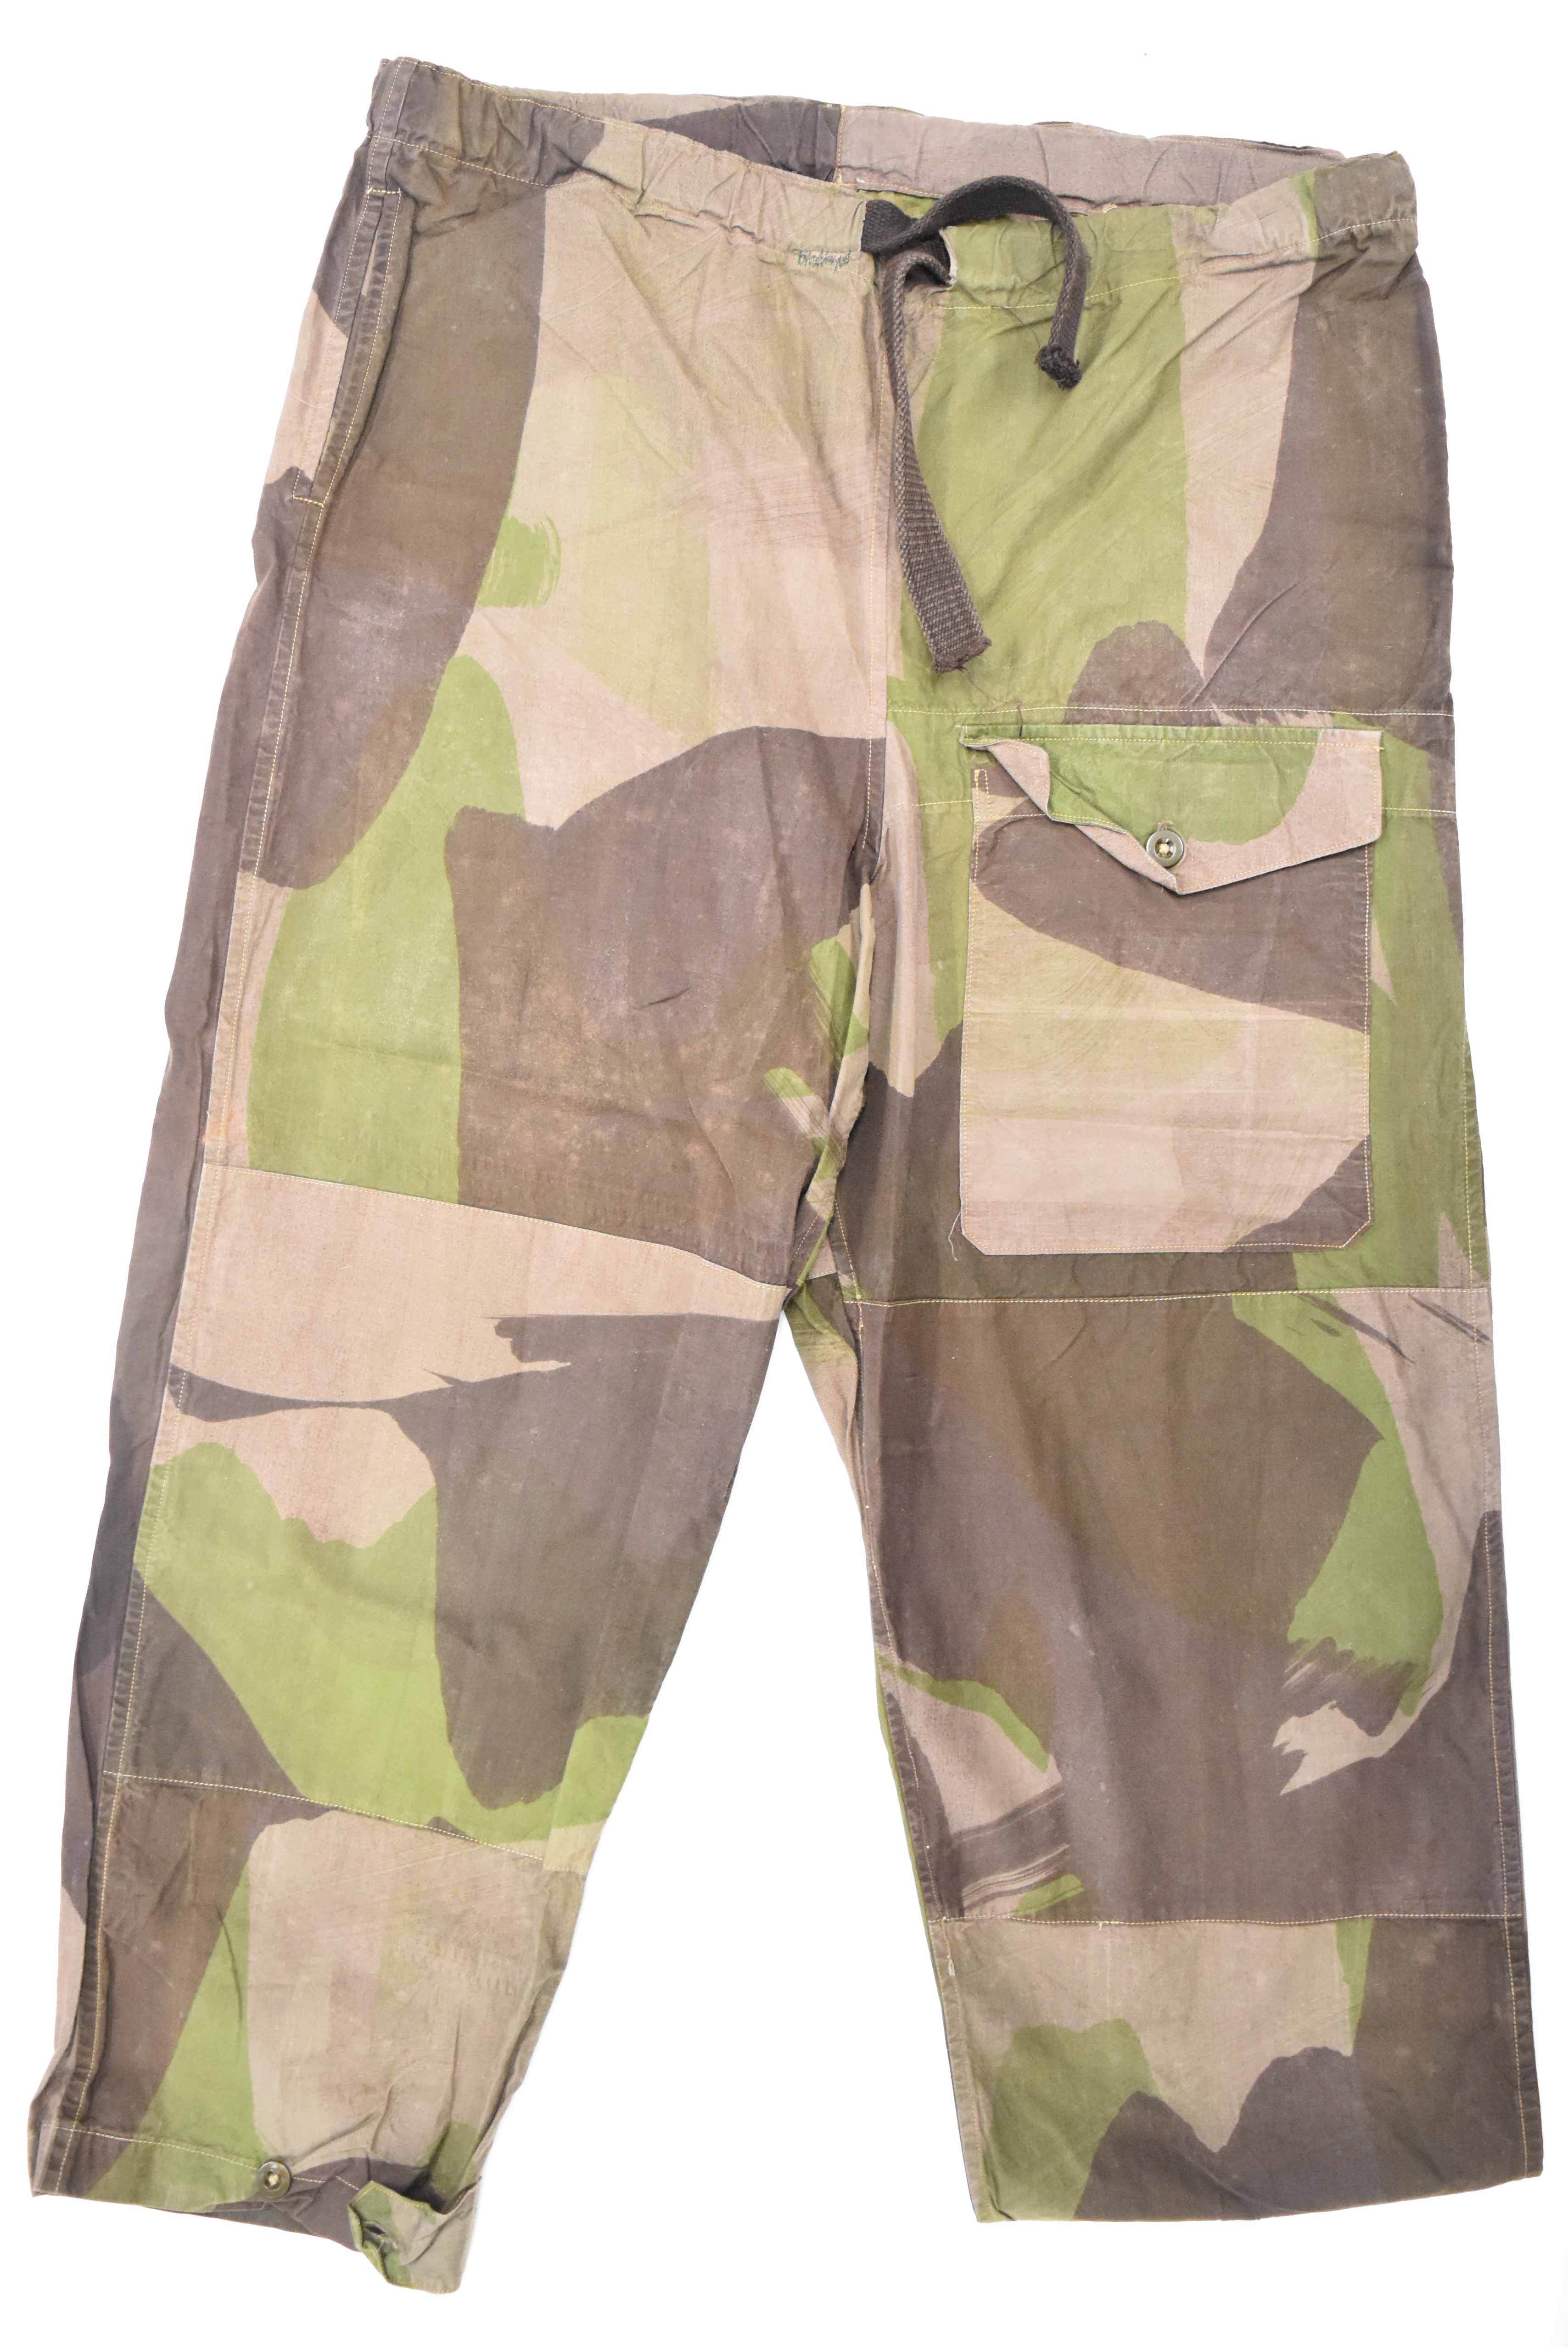 British WW2 SAS windproof camouflage trousers with single front pocket, cloth ties, external label